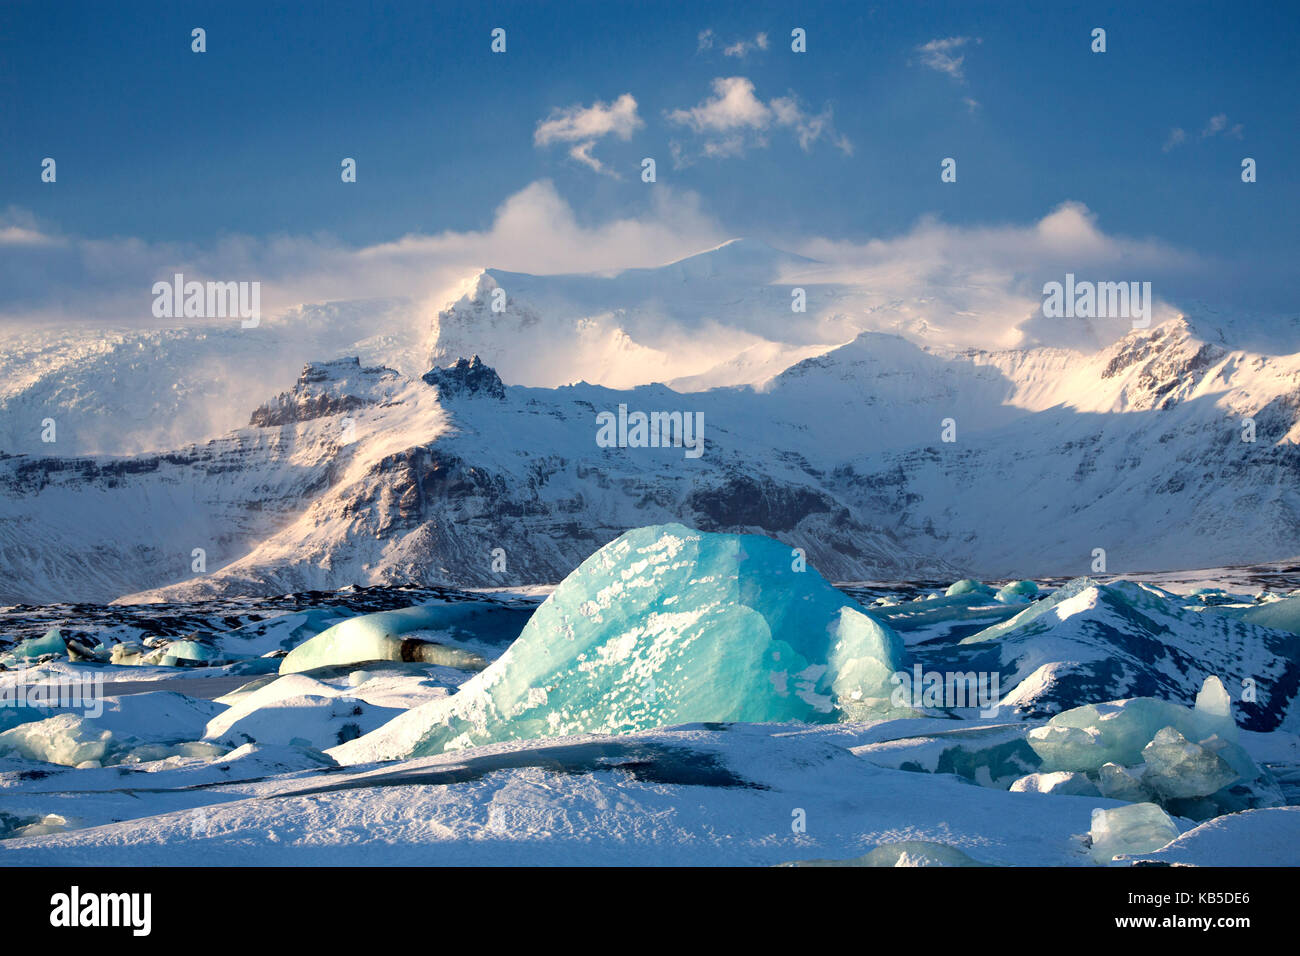 Winter view over frozen Jokulsarlon Glacier Lagoon showing blue icebergs covered in snow and distant mountains, South Iceland Stock Photo